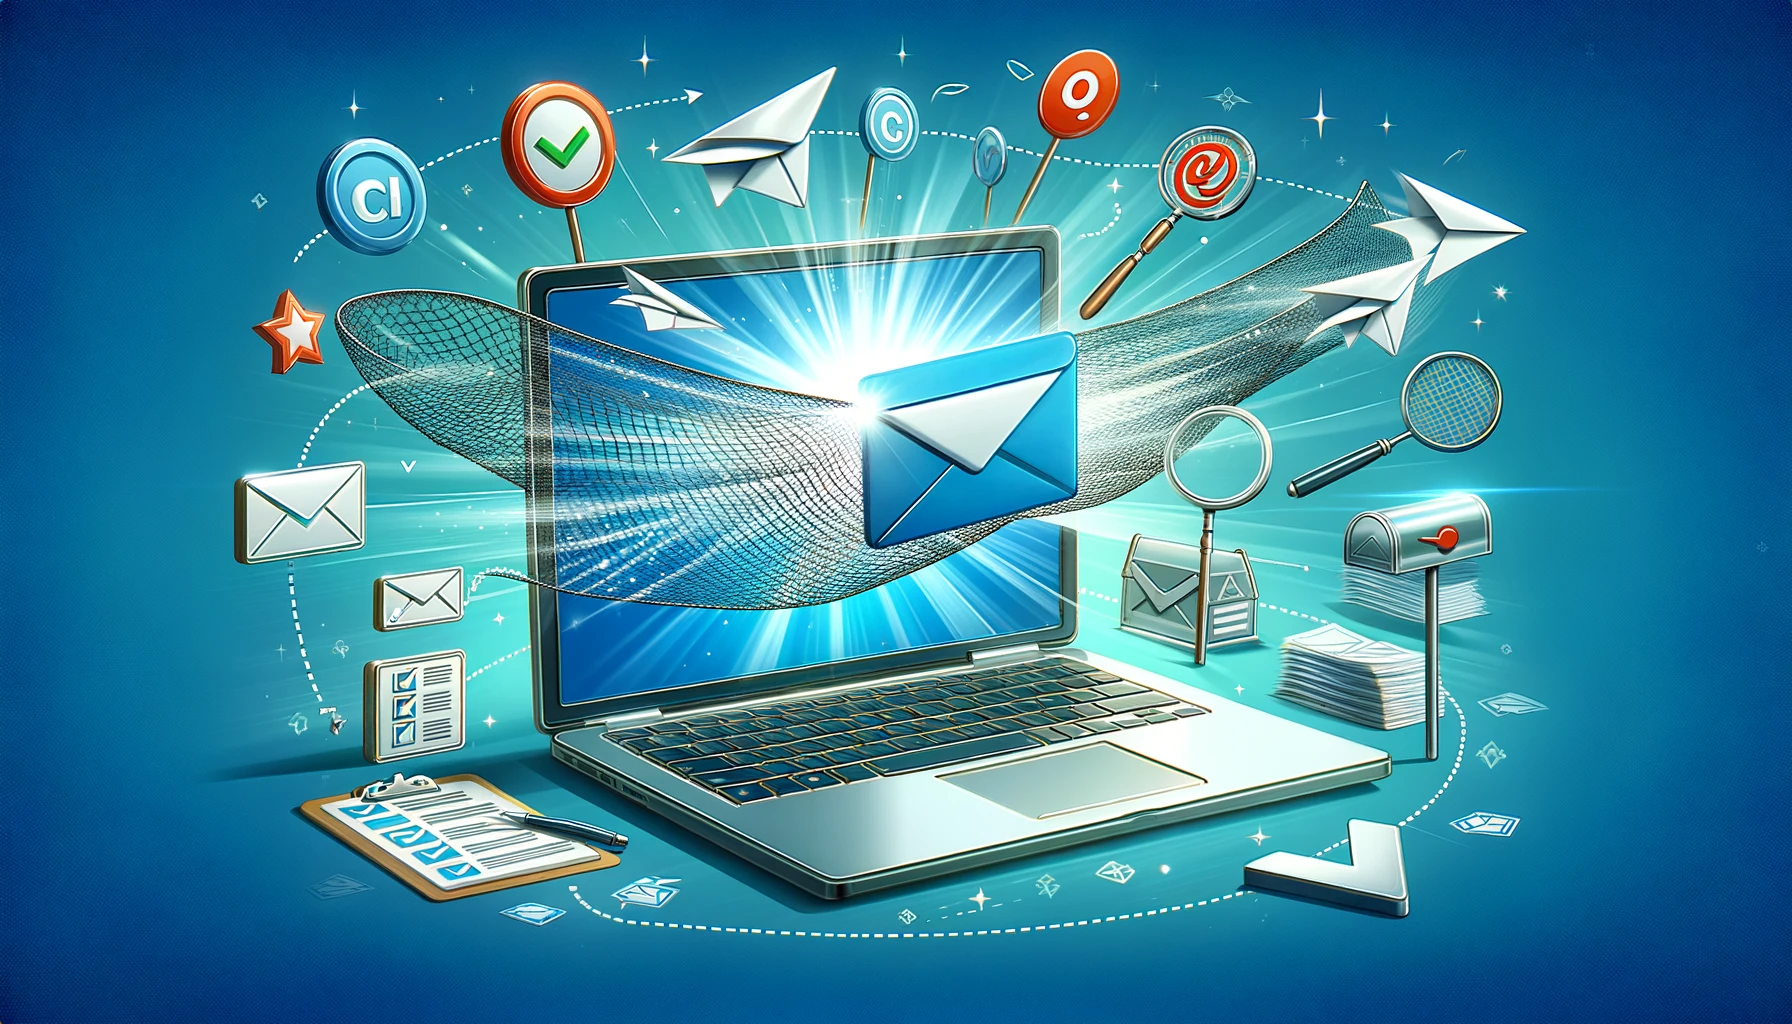 Image symbolizing 'Ensuring Email Deliverability', featuring an open laptop displaying a stylized email successfully navigating through obstacles to reach an inbox, surrounded by symbols of good email practices.